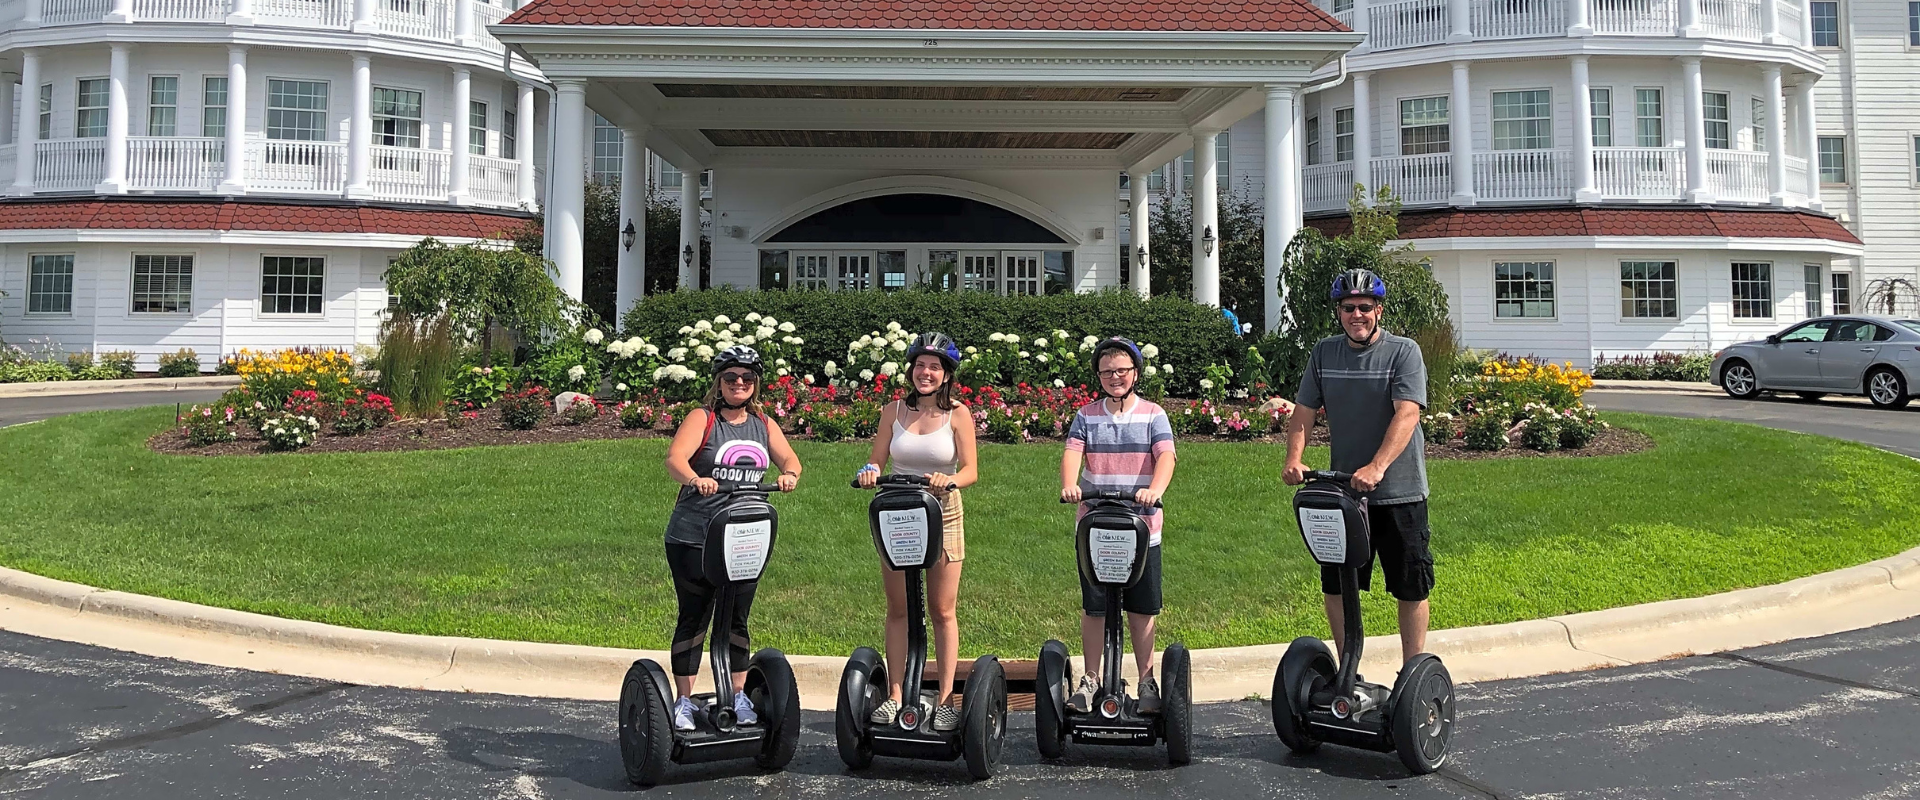 SEGWAY THE LAKE WEBSITE FEATURE